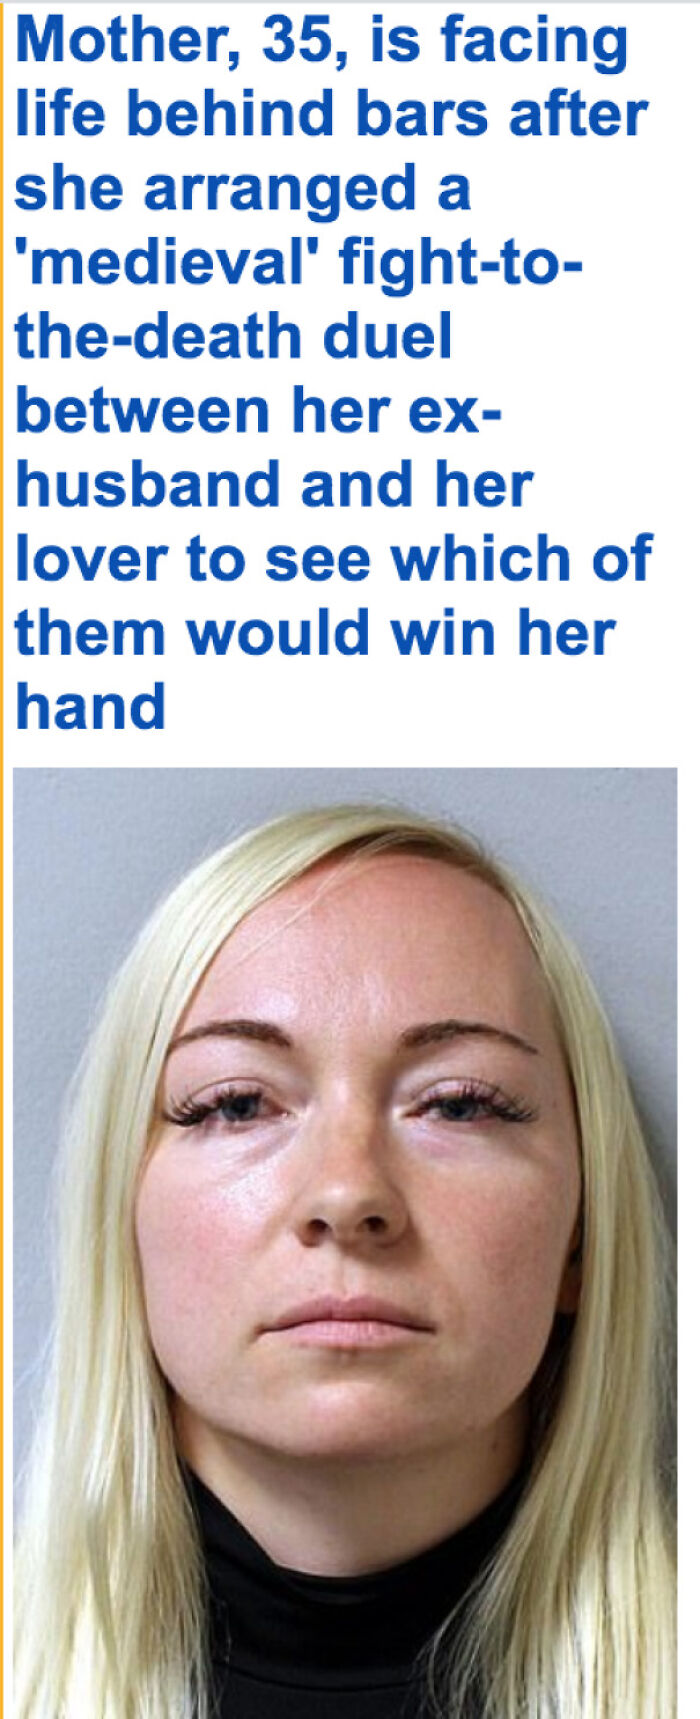 Messed up headlines - Mother - Mother, 35, is facing life behind bars after she arranged a 'medieval' fightto thedeath duel between her ex husband and her lover to see which of them would win her hand